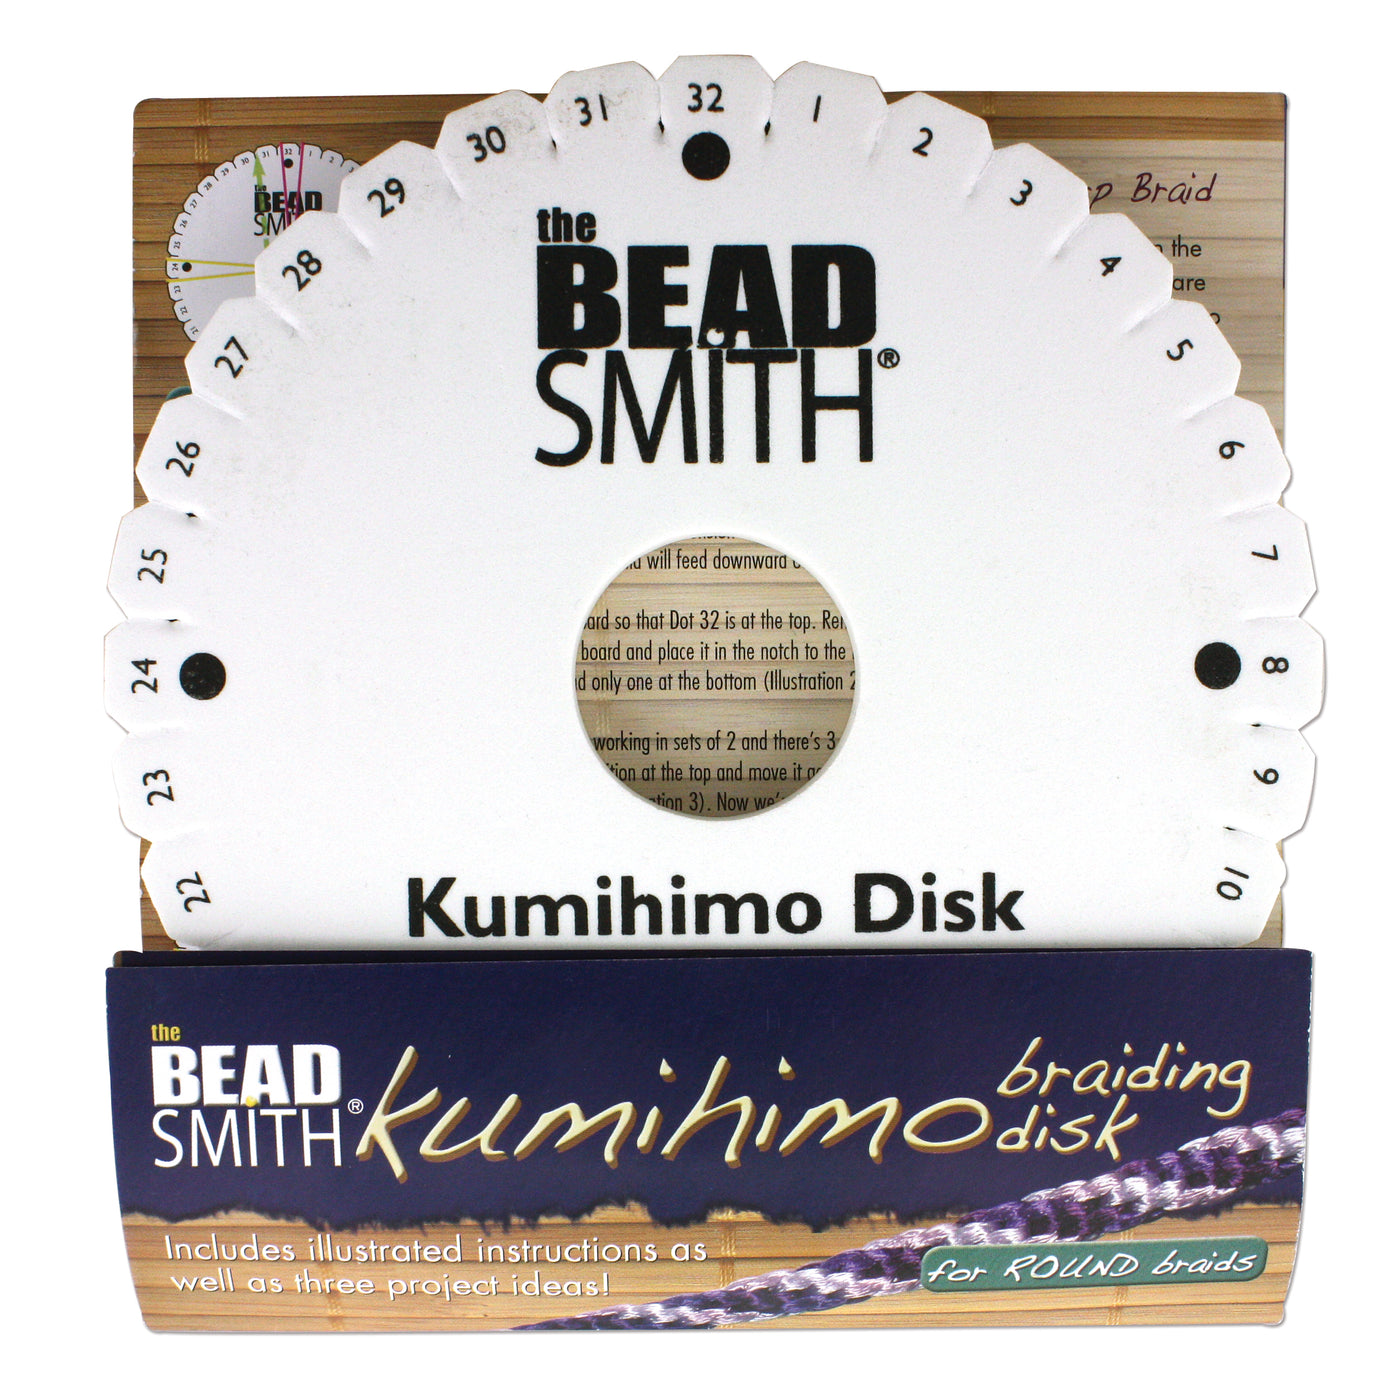 Kumihimo Disk, 64 Slots High Density Foam Disk, 6 Inch Disk, 20mm Thick,  35mm Center Hole, Provides Excellent Tension, Limit 2 per Order 